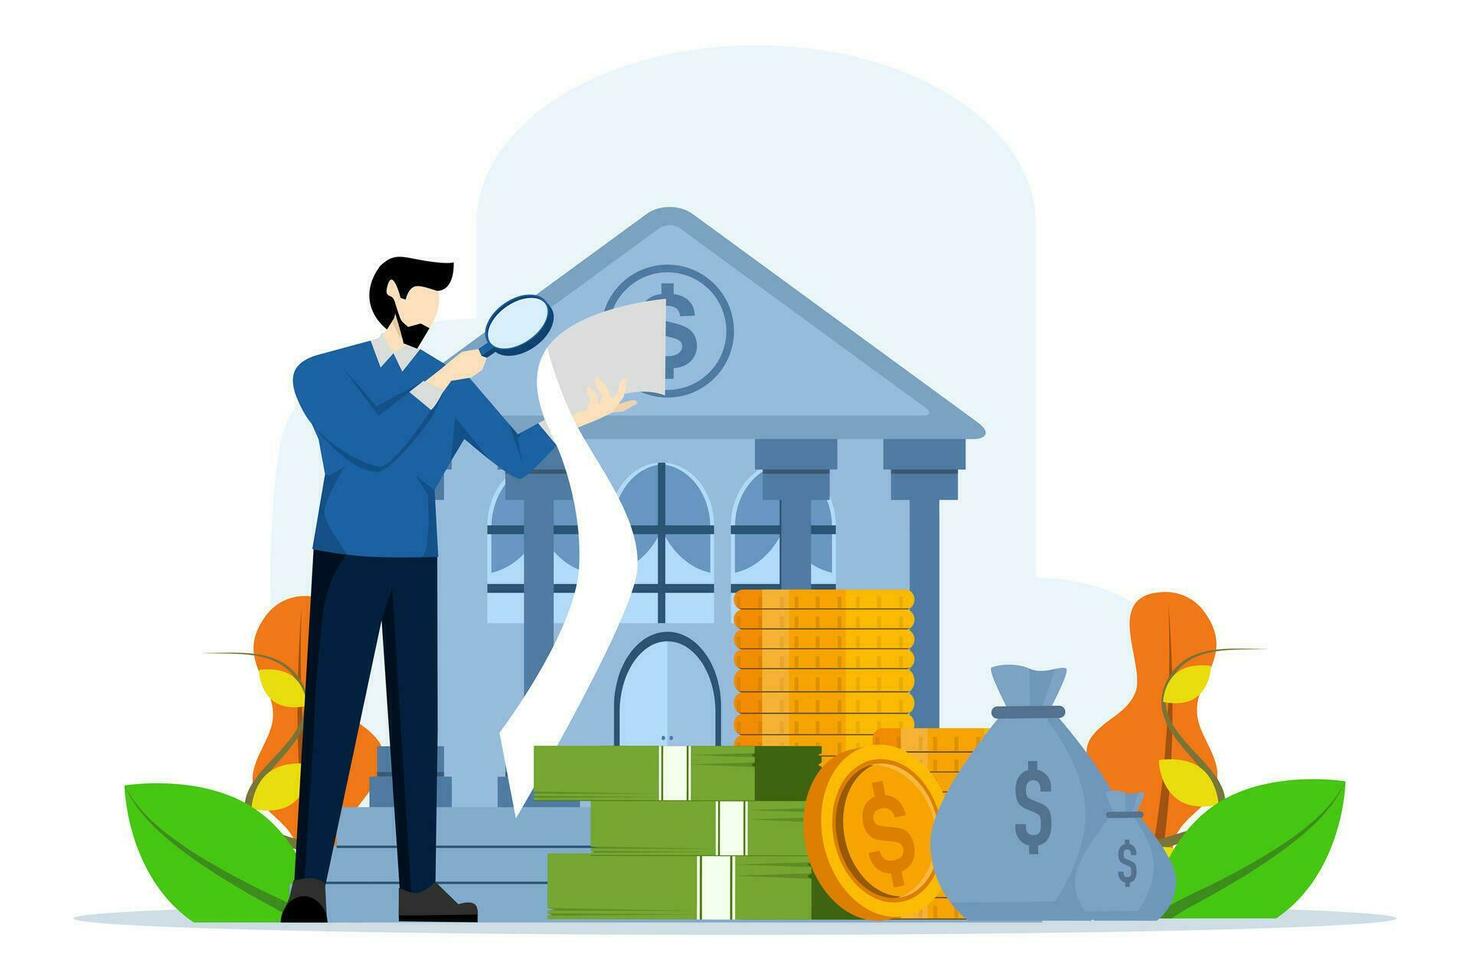 financial management concept. Characters counting money for savings, analyzing public finances, concept of saving money in bank. Financial audit concept. Flat vector illustration on white background.